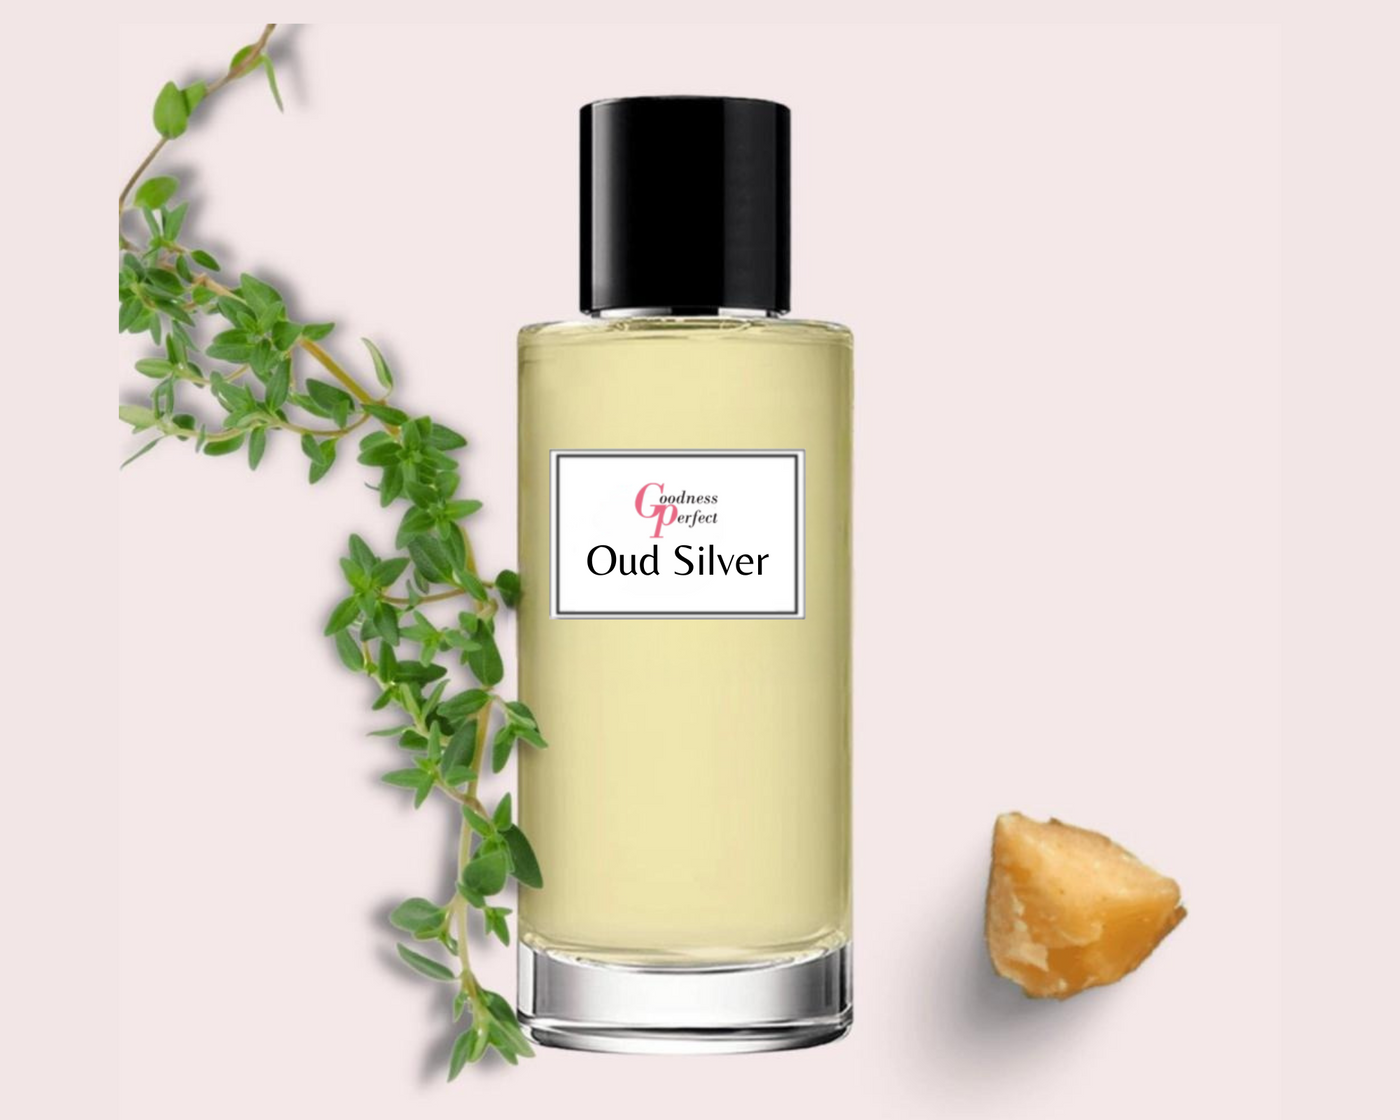 Oud Silver Perfume Inspired by Silverwood